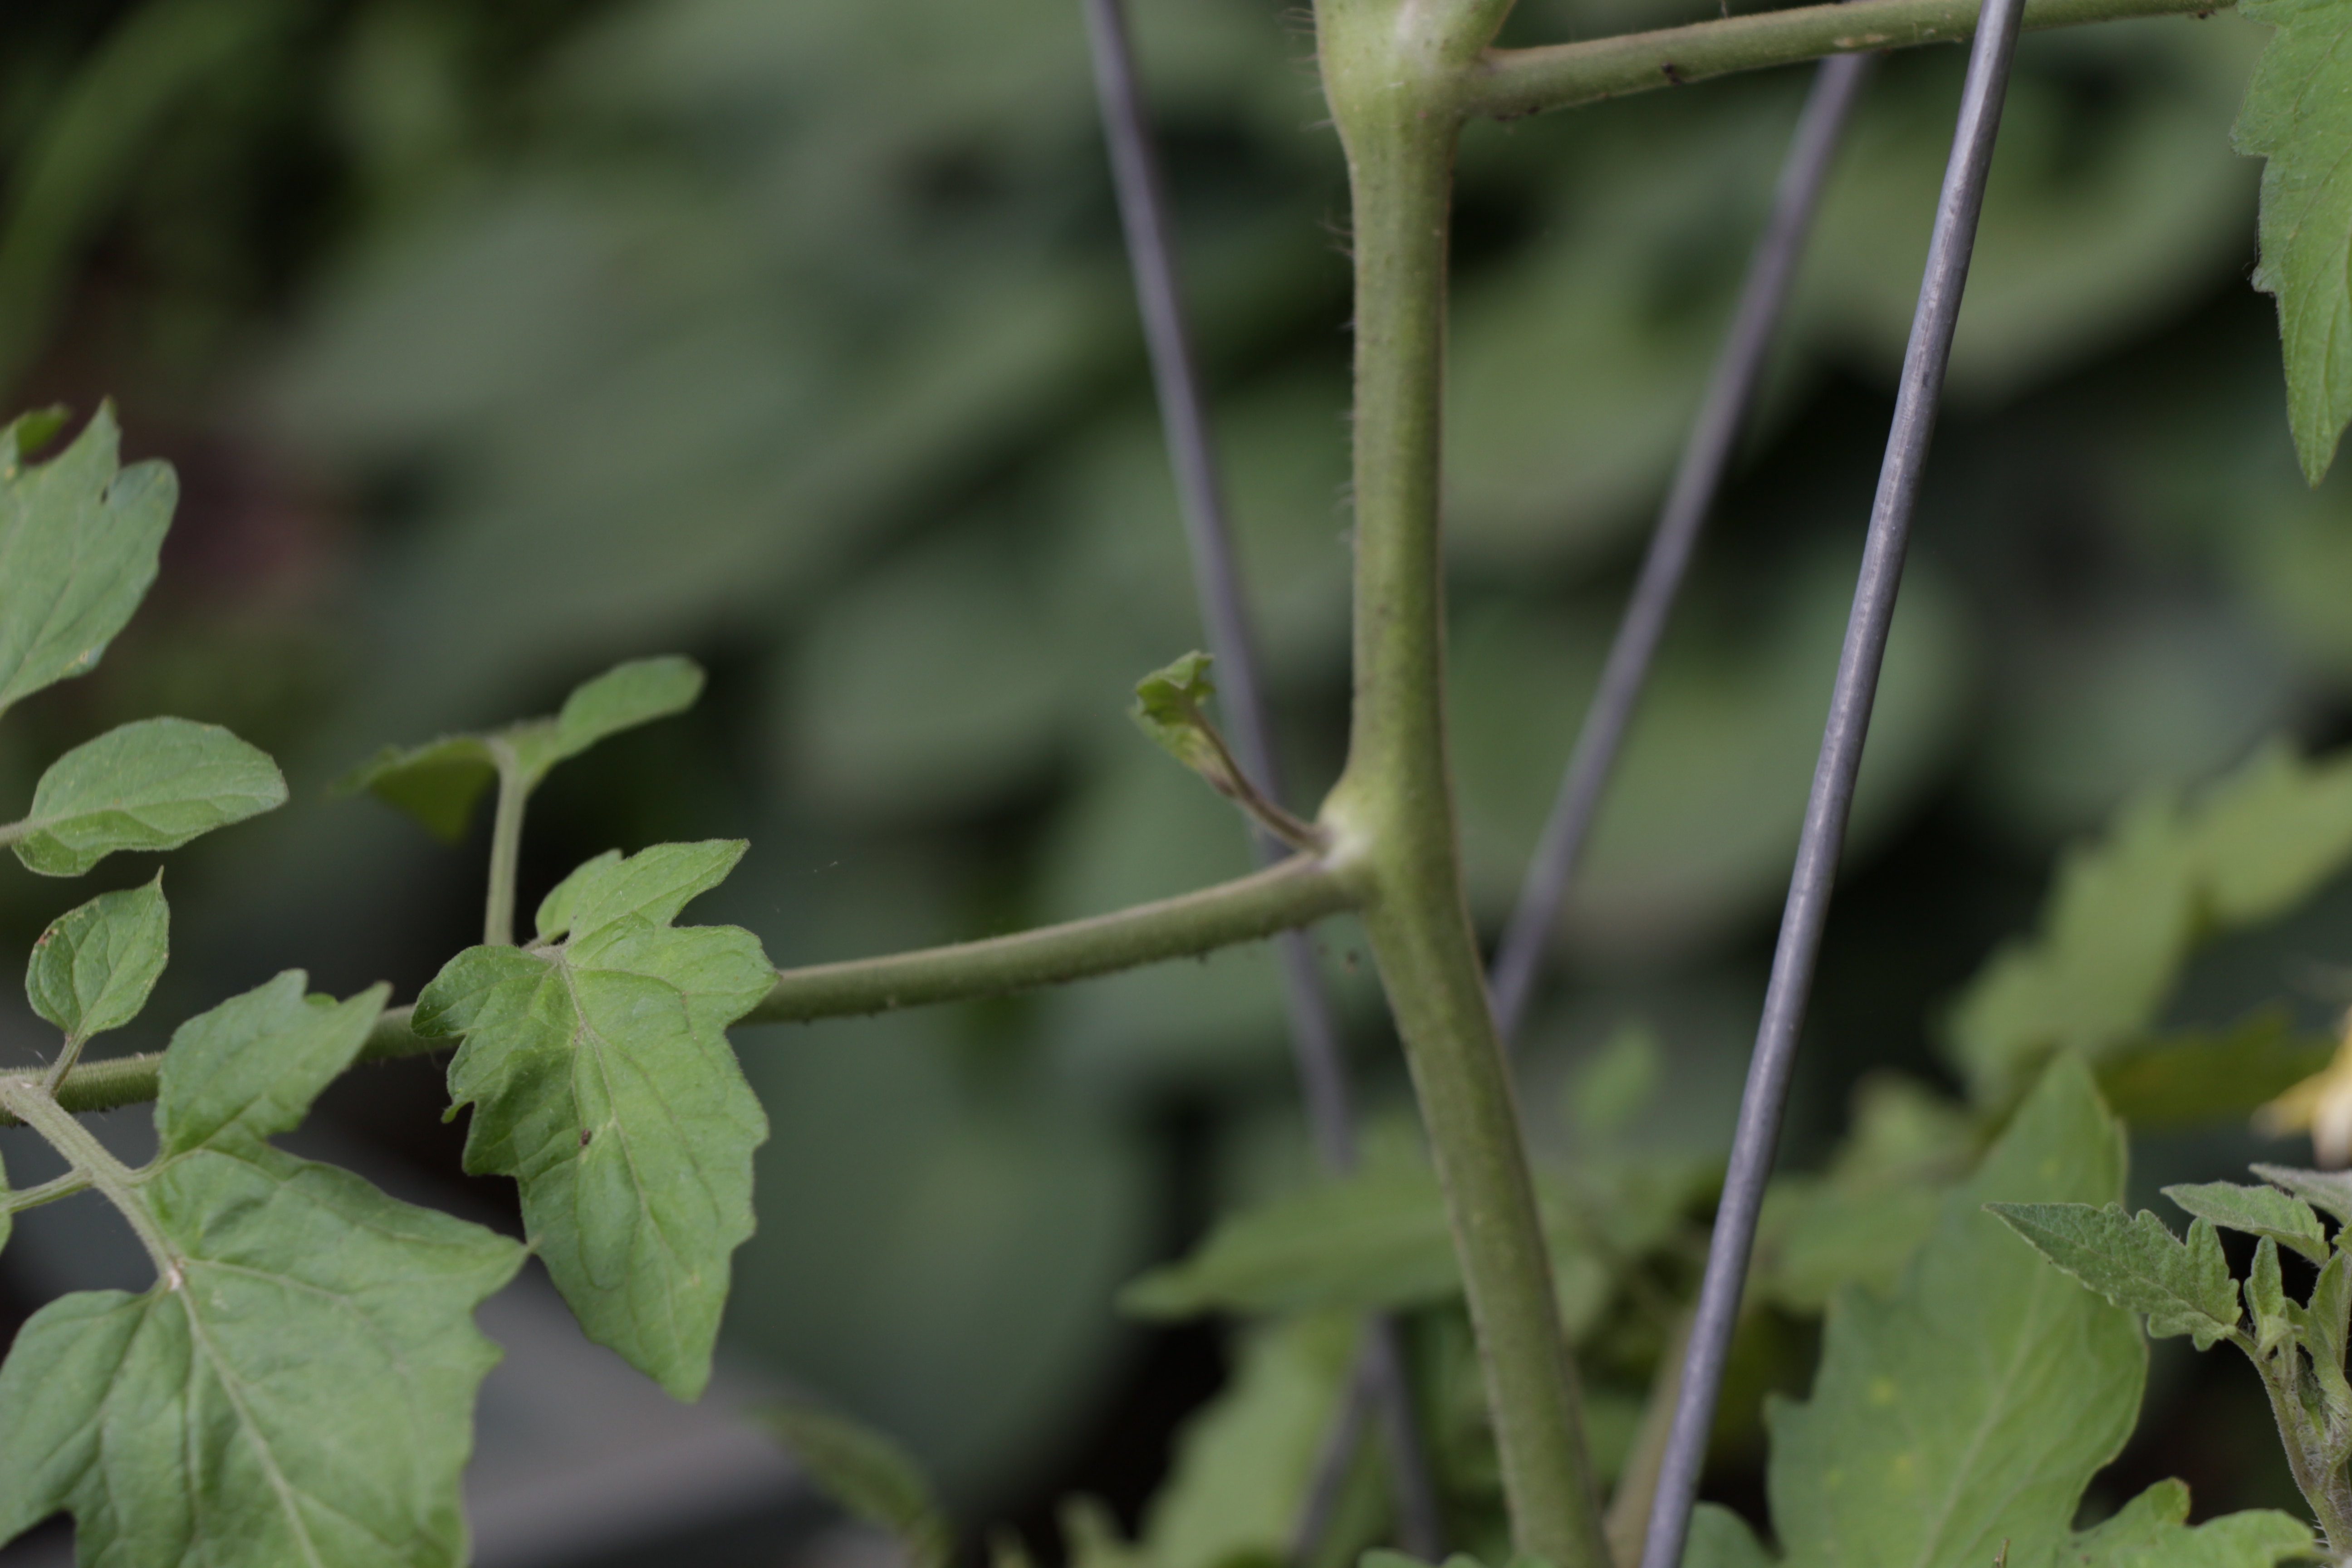 Tomato sucker growing from junction of main stem and leaf.